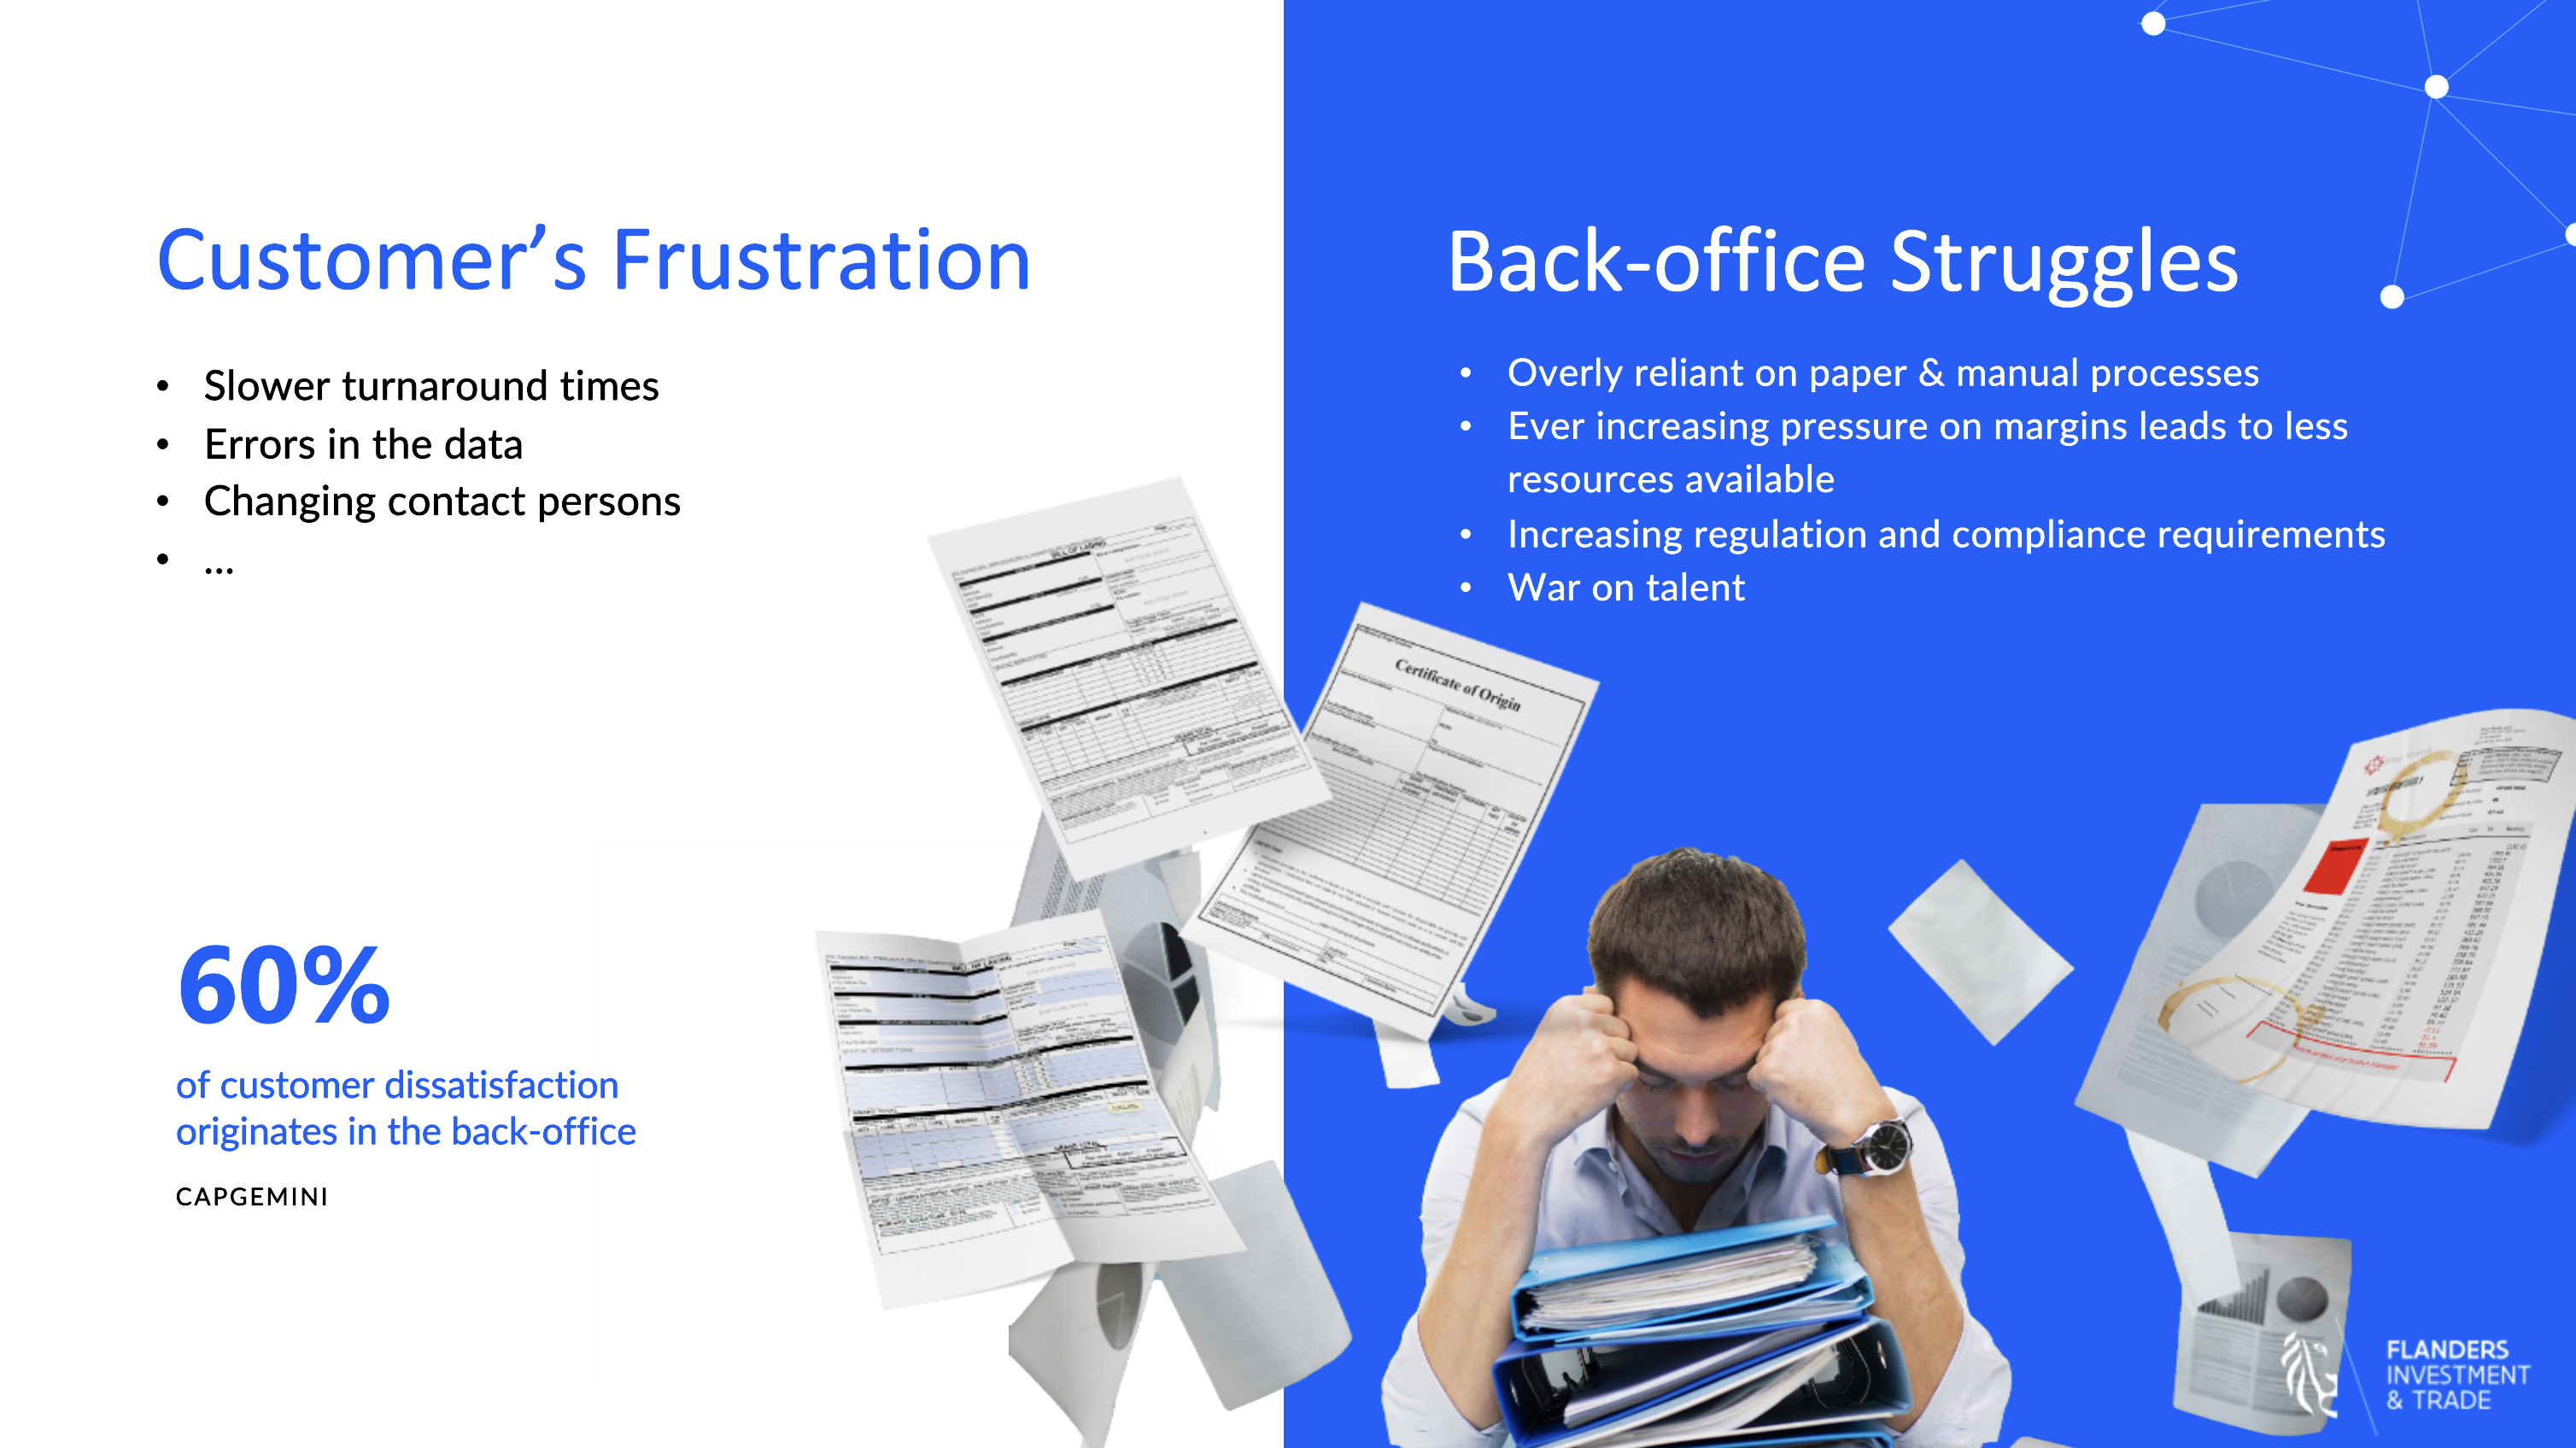 Back-office challenges